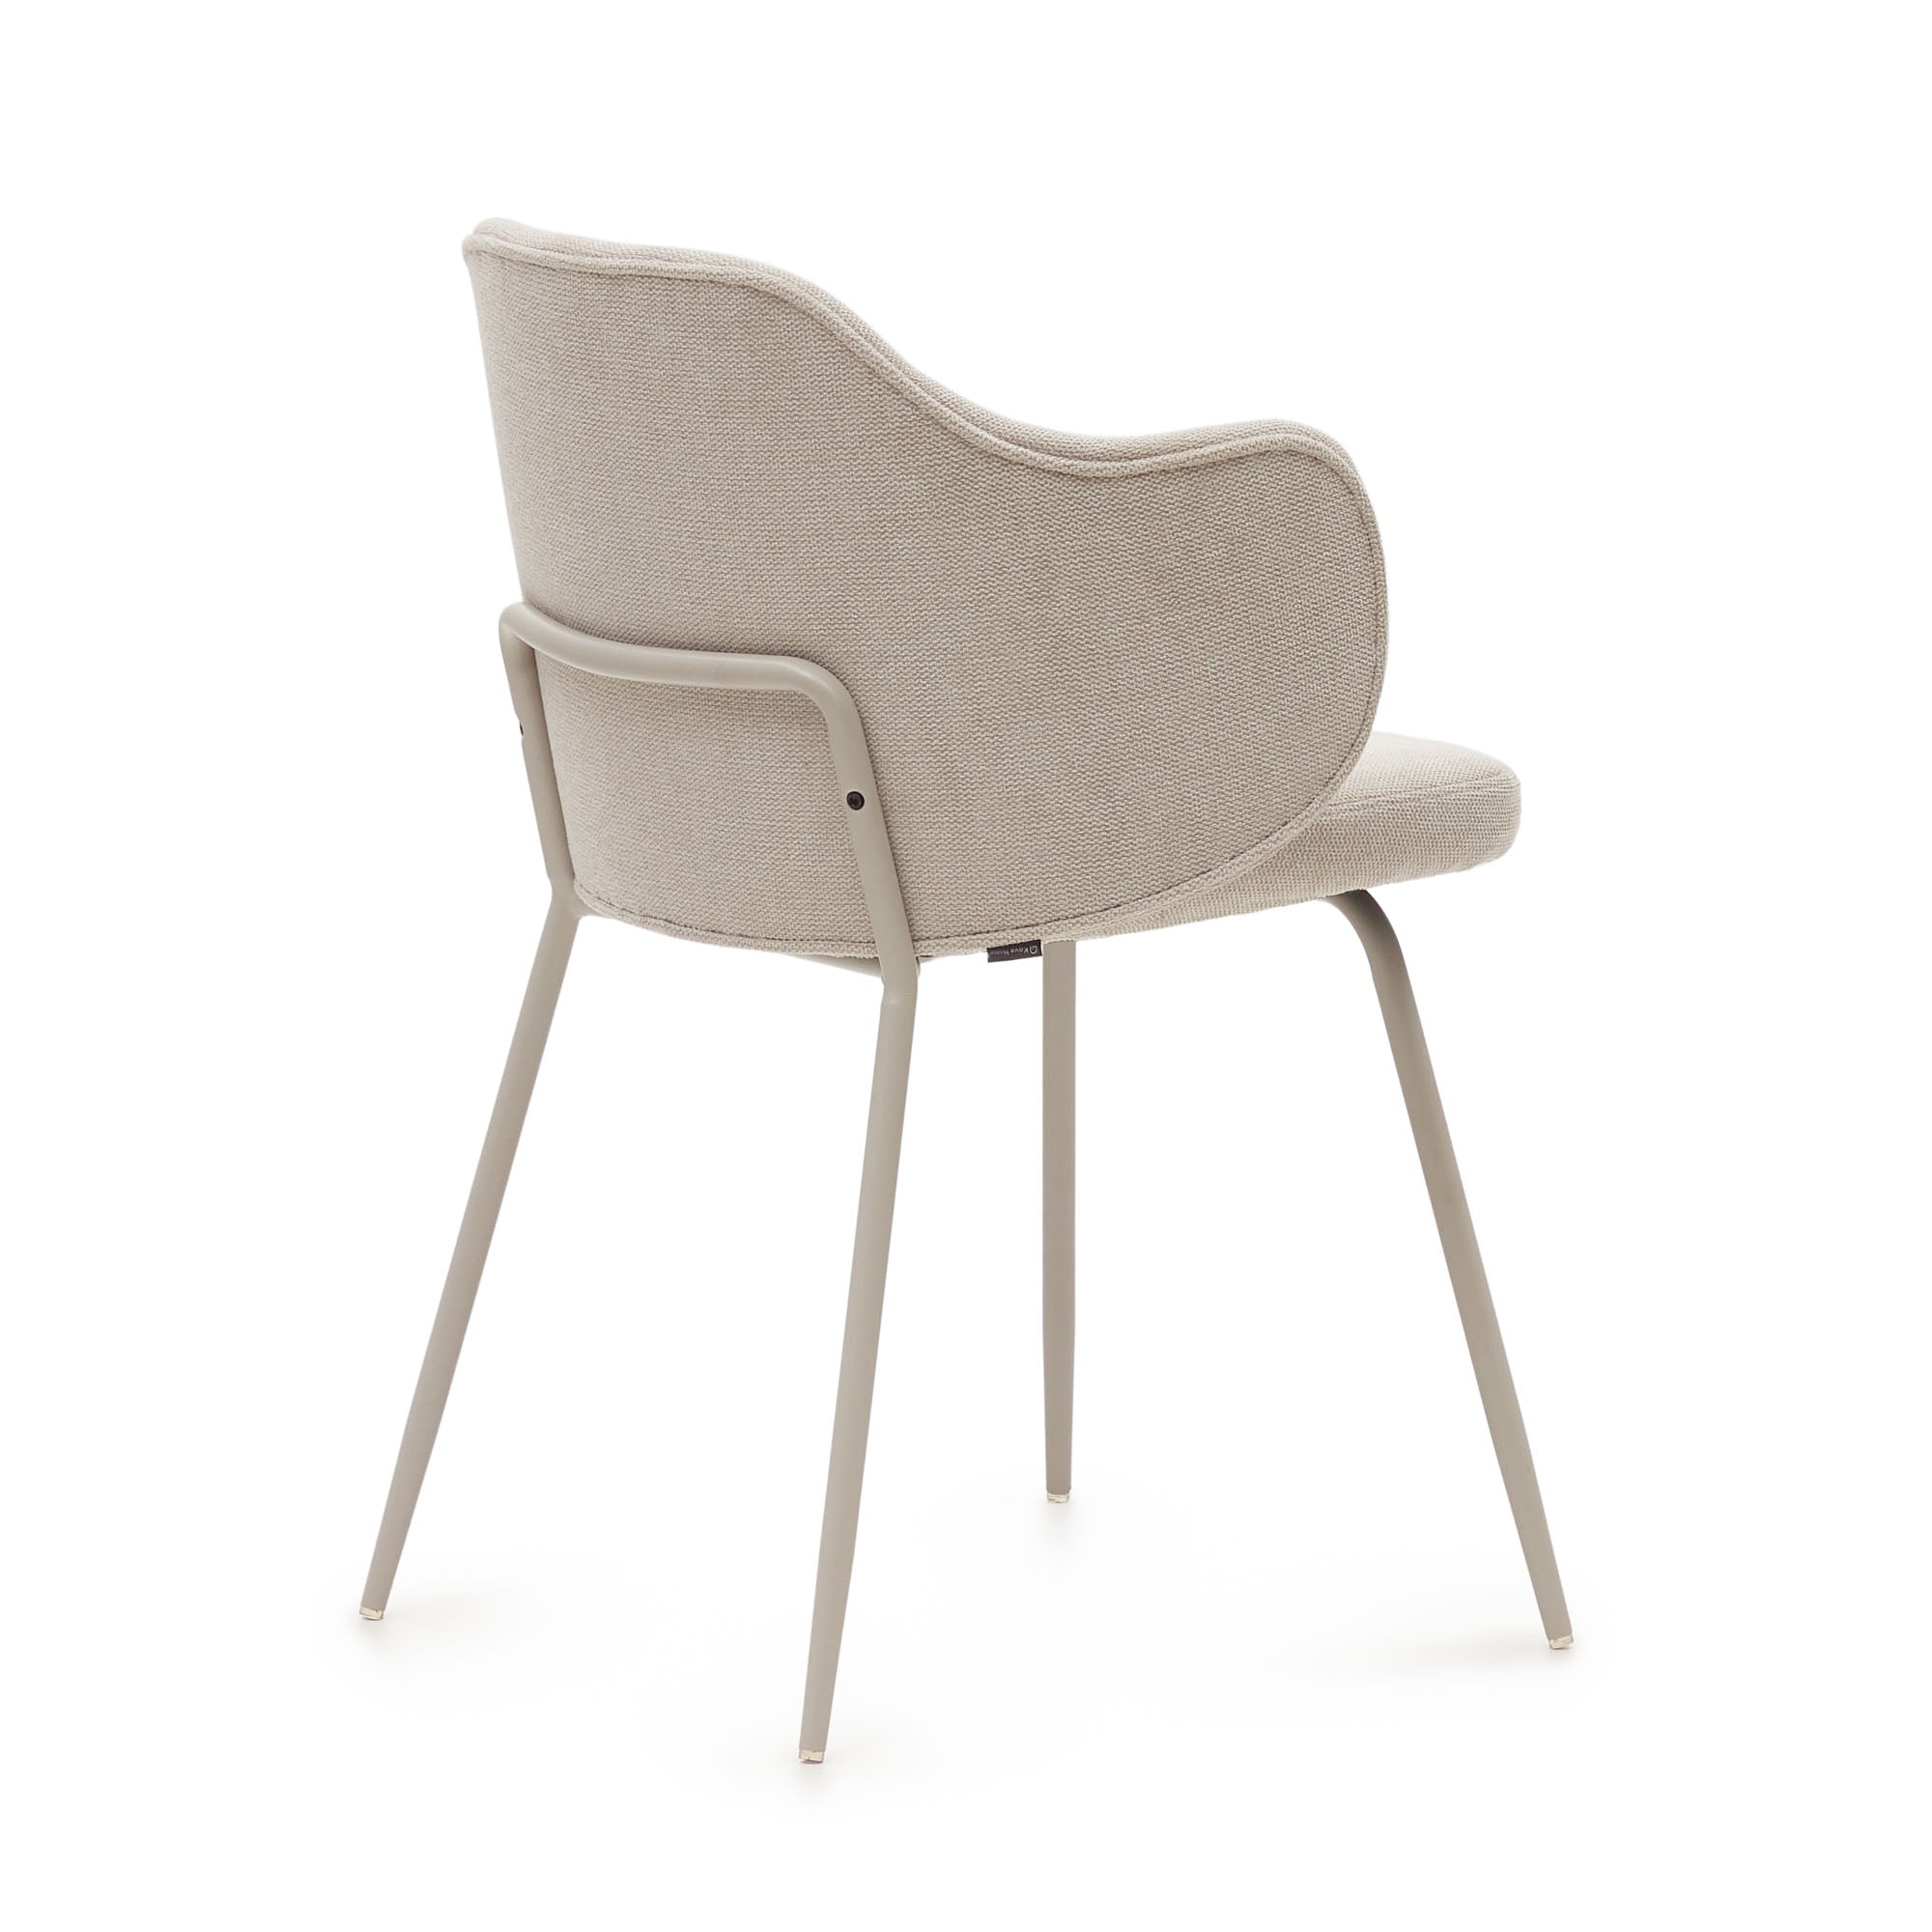 Yunia chair in beige with steel legs in a painted beige finish